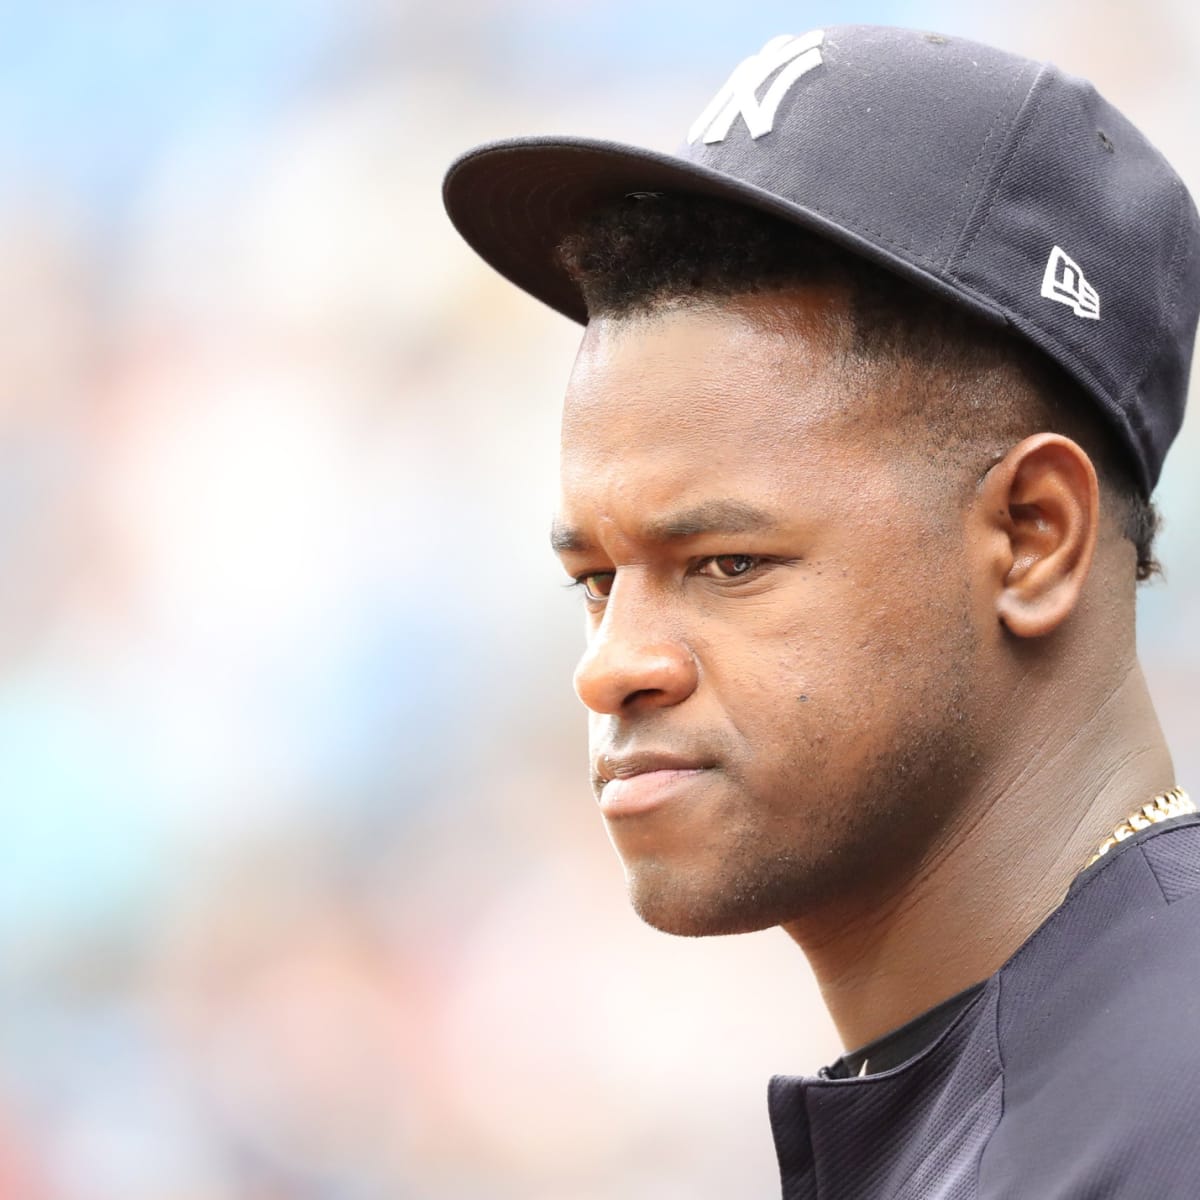 Yankees right-hander Luis Severino exits start with right shoulder